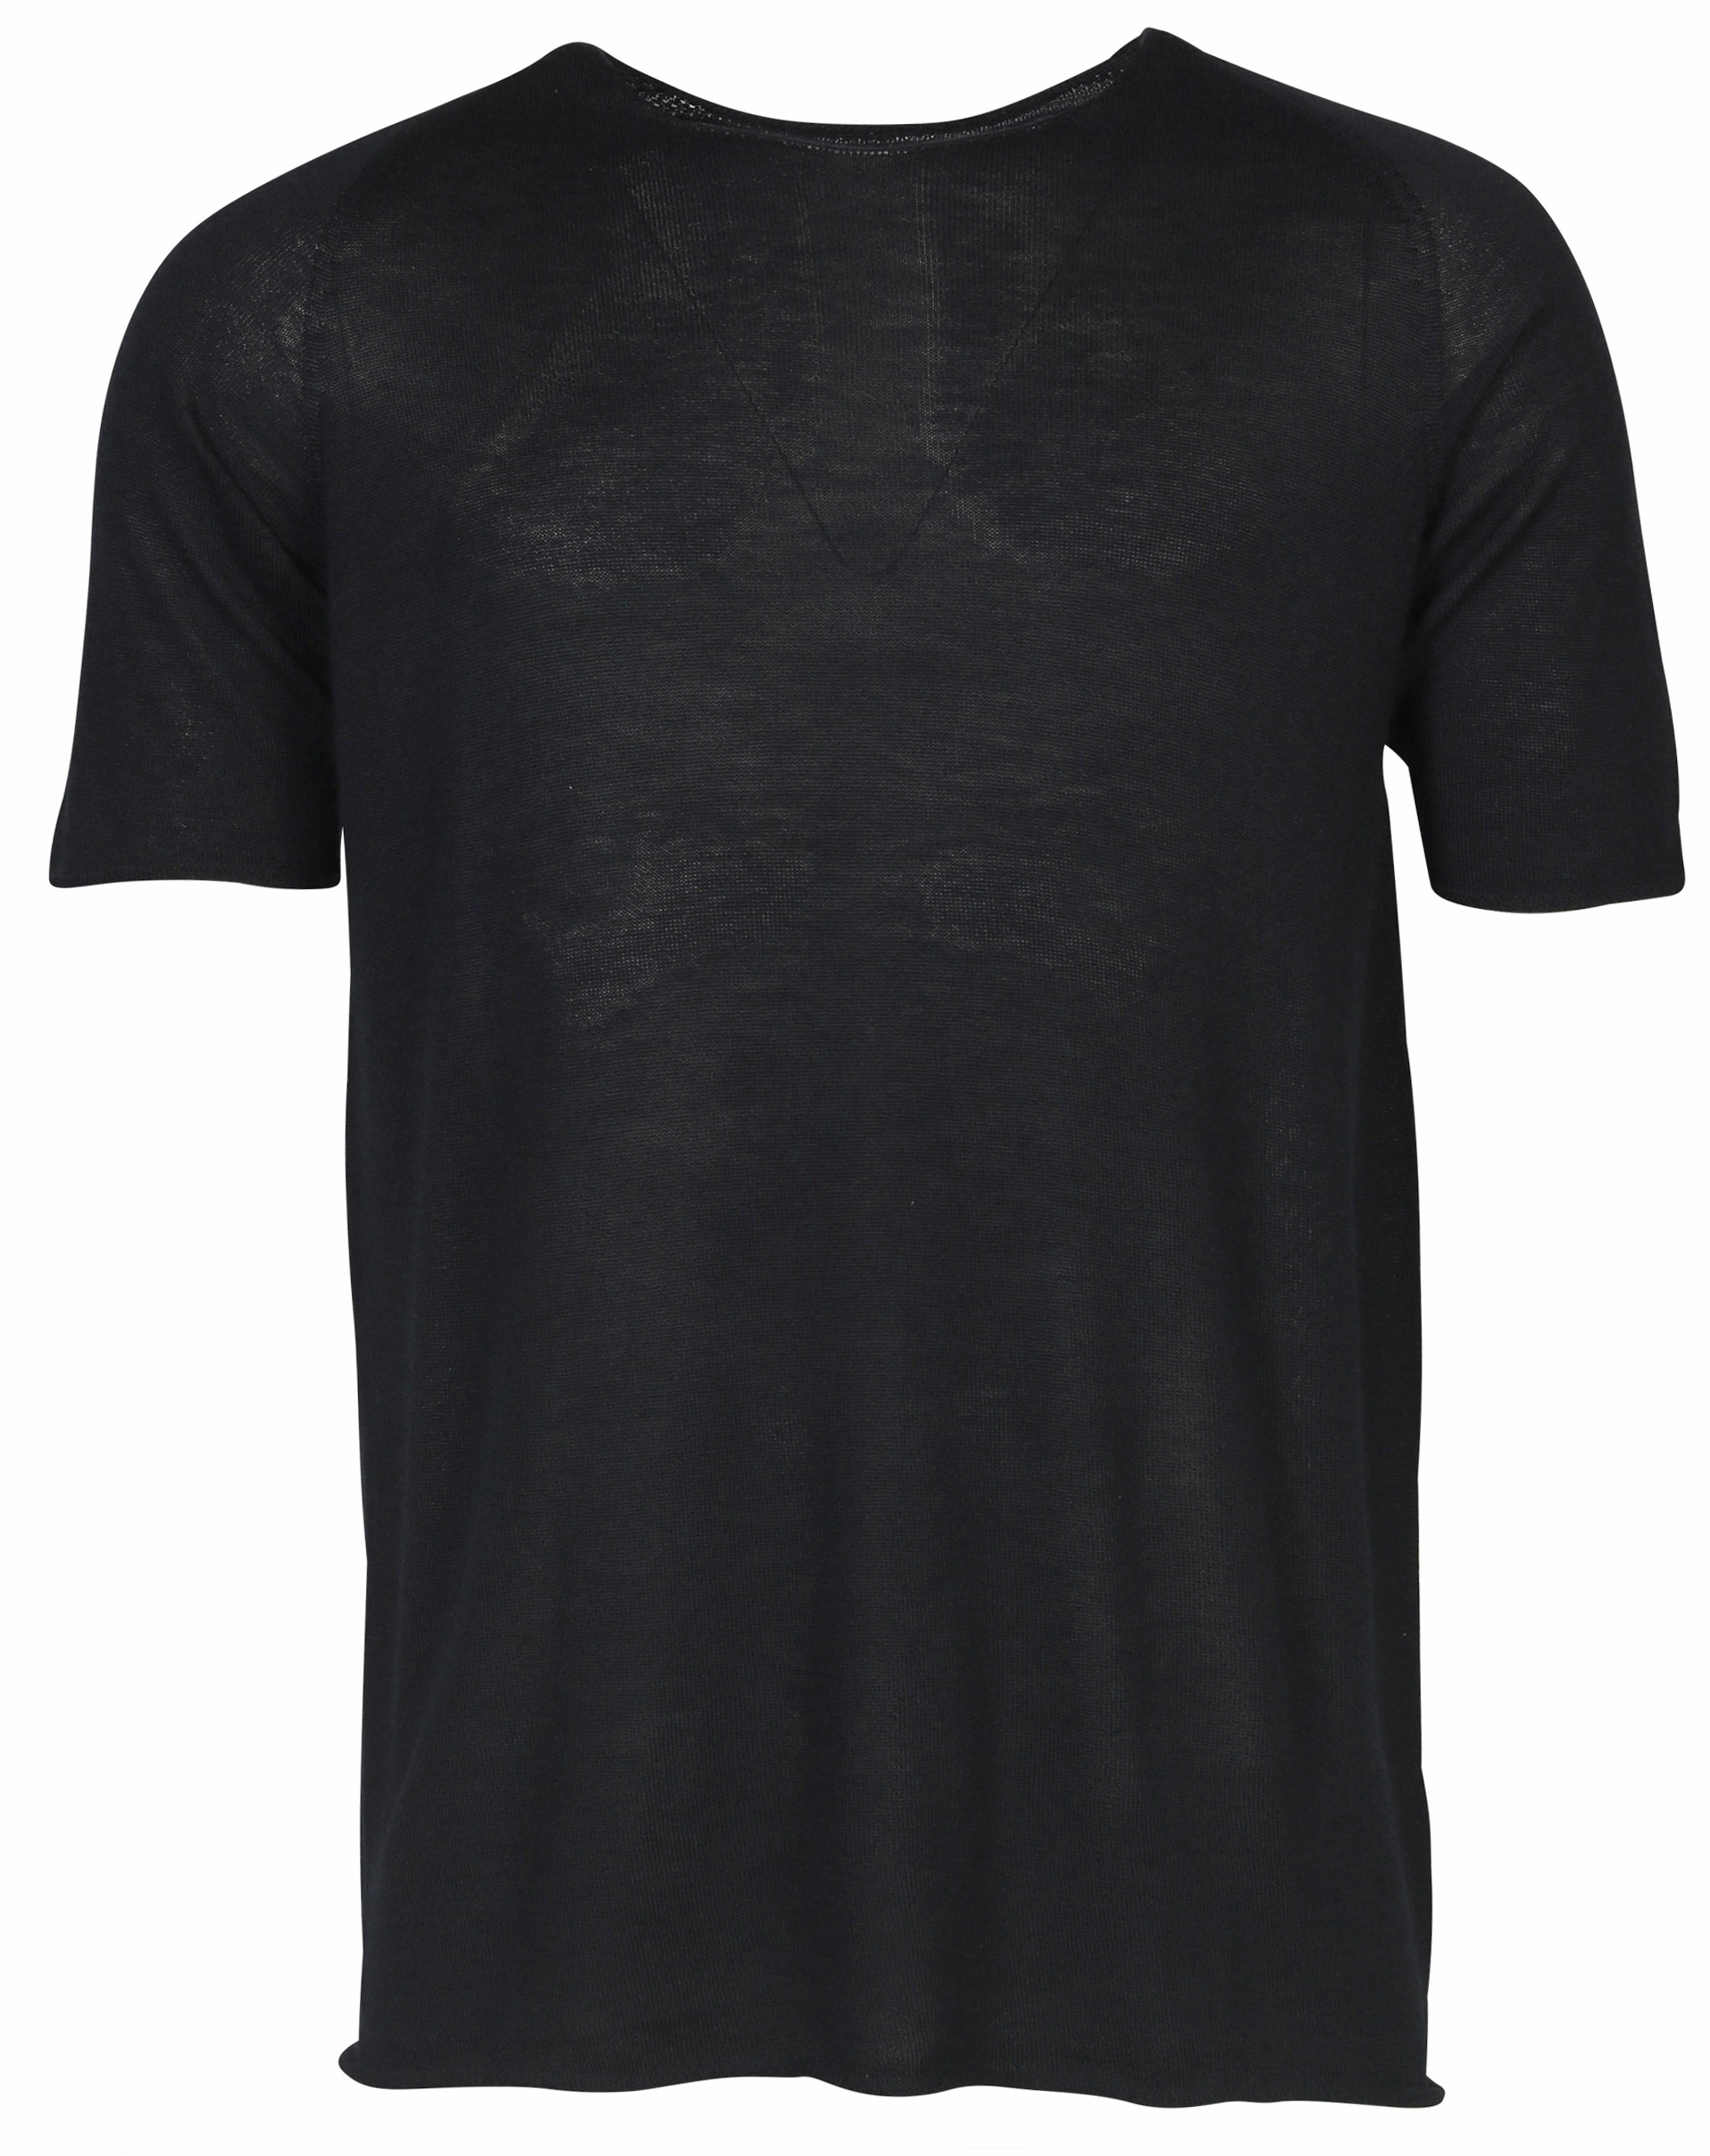 Hannes Roether Cashmere T-Shirt Navy